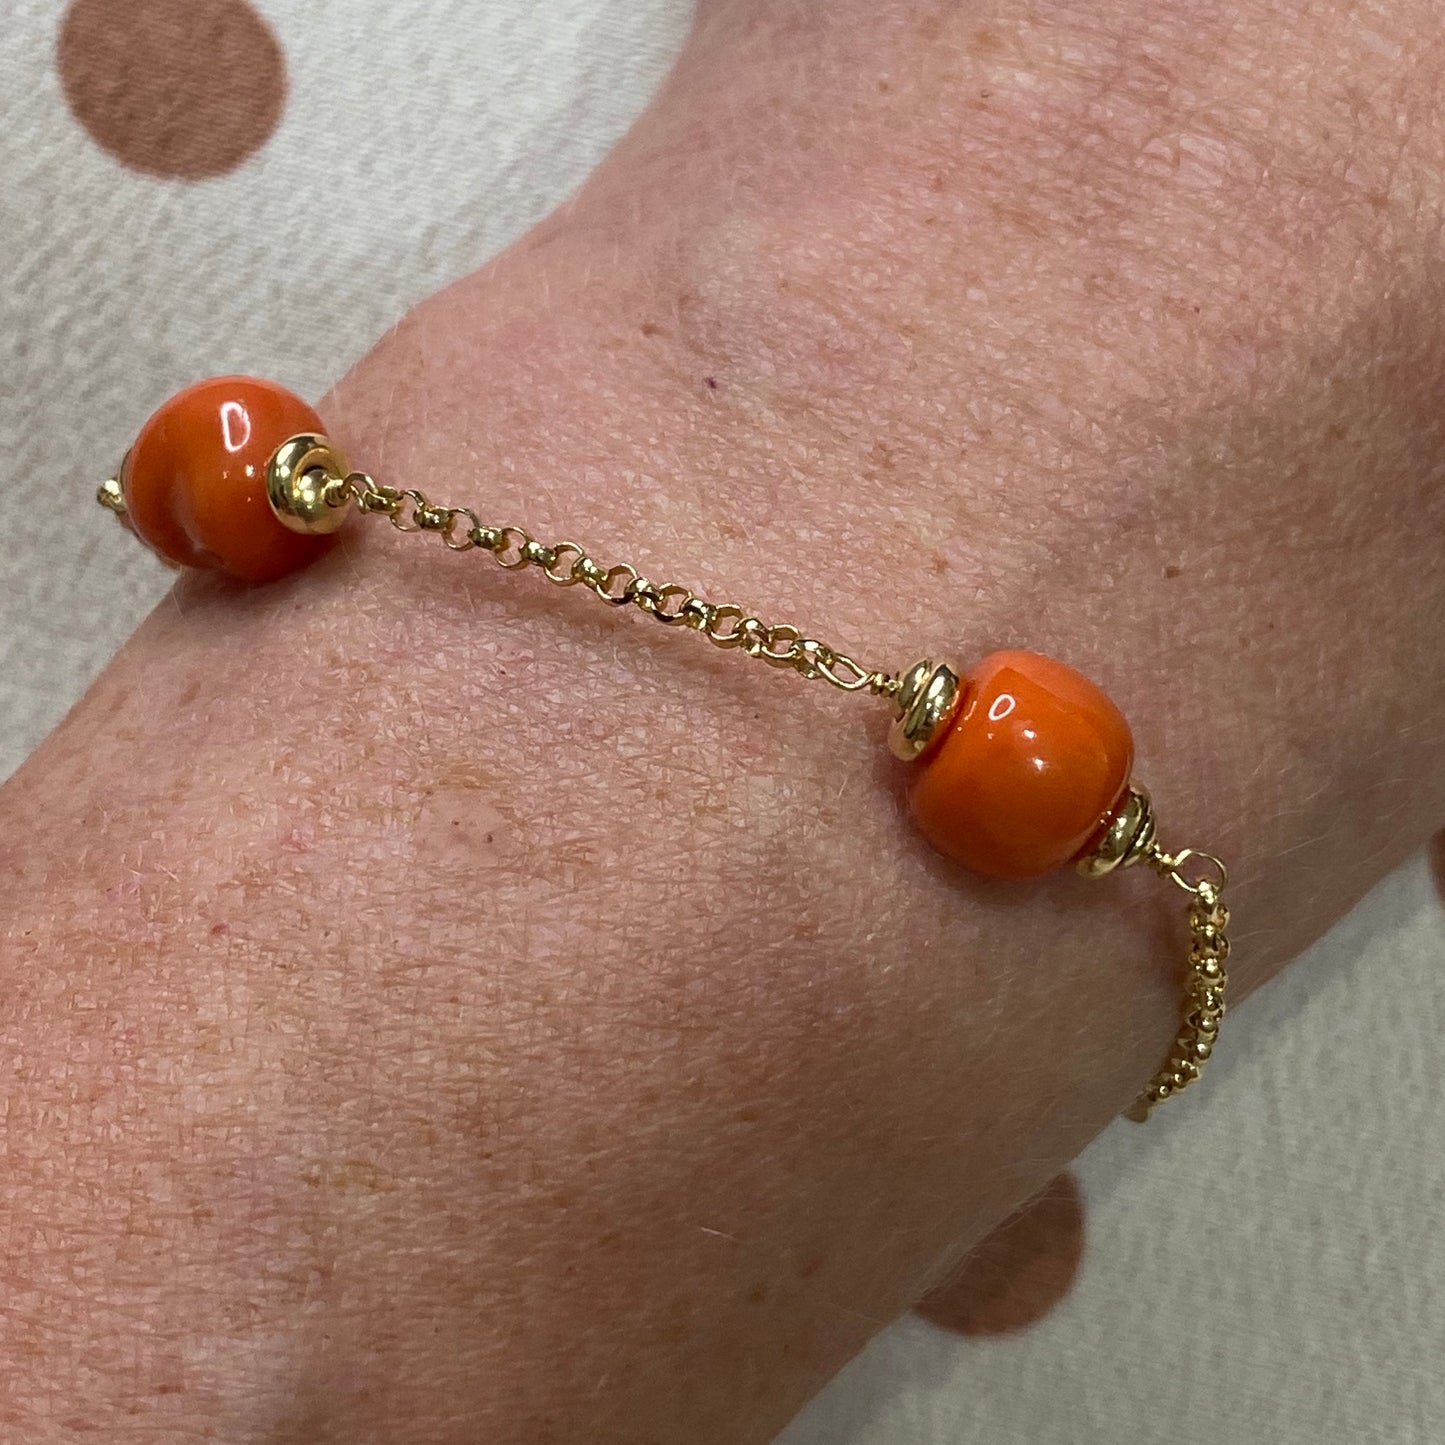 18ct Gold Soft Red Coral & Chain Bracelet - John Ross Jewellers